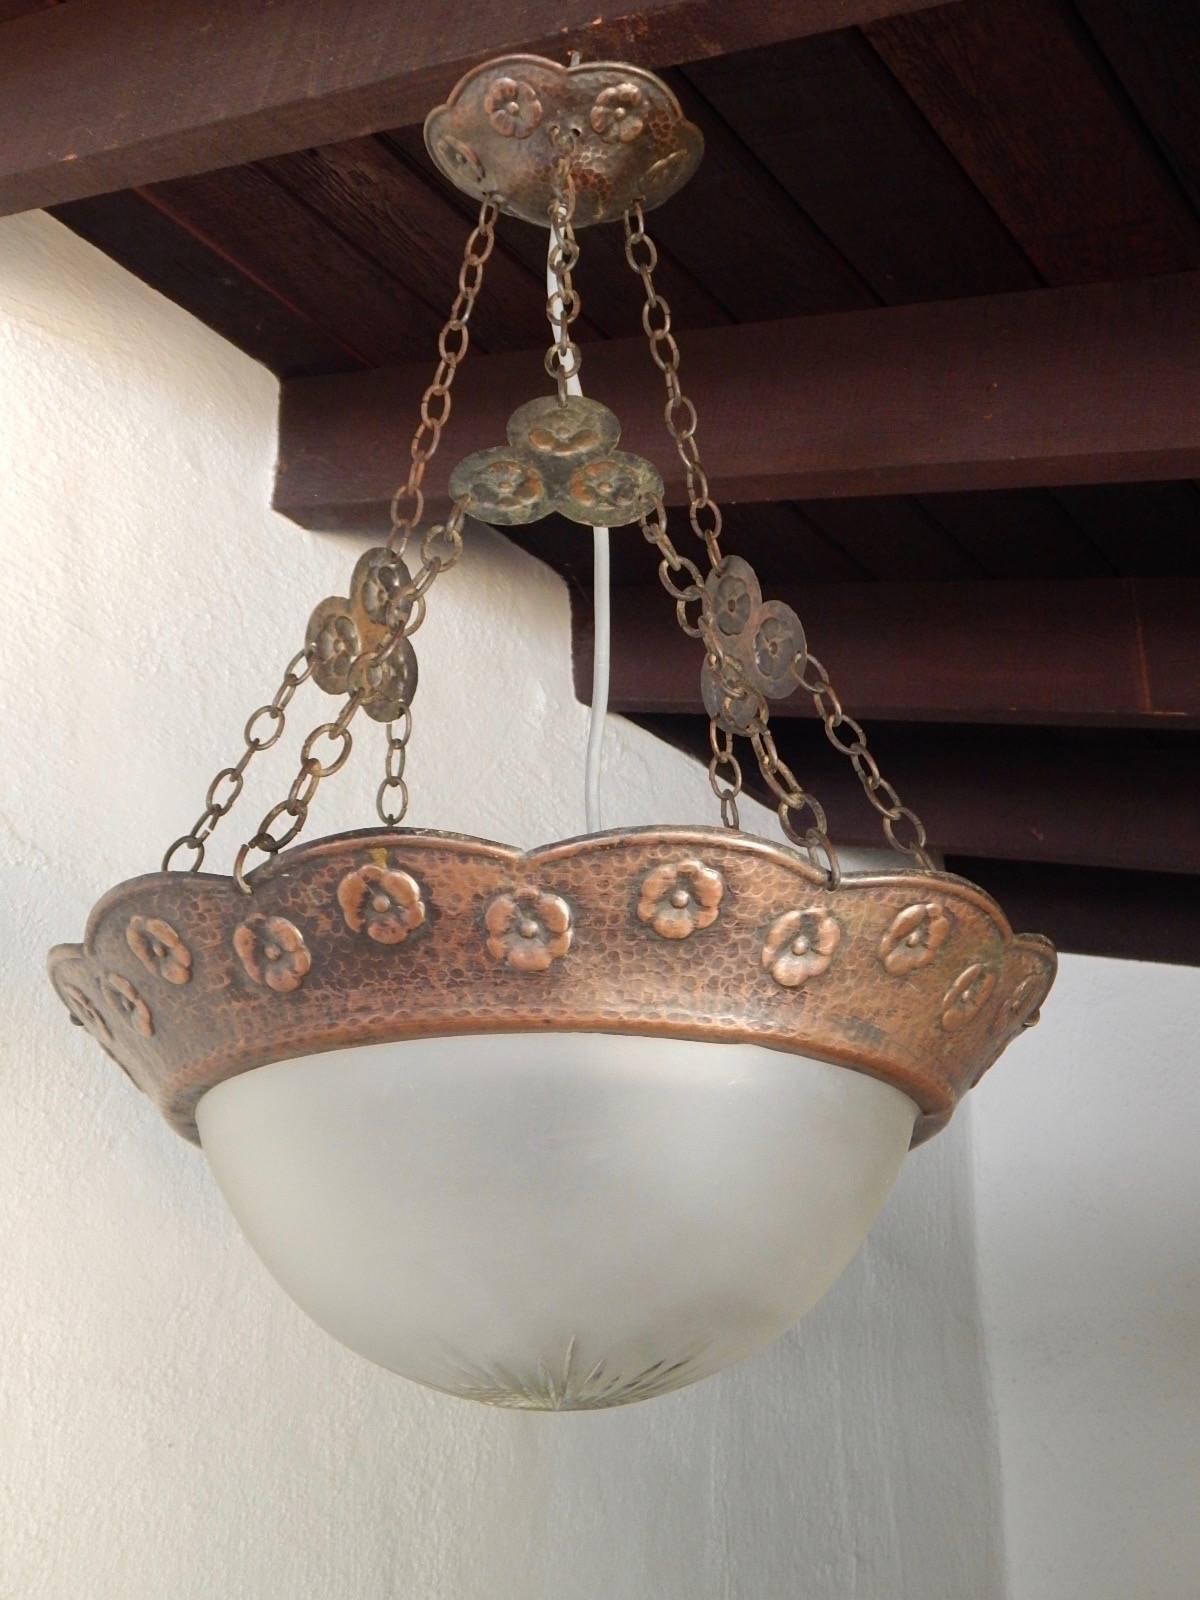 Early 20th Century Swedish Arts & Crafts Hammered Copper Hanging Light Fixture, circa 1910 For Sale